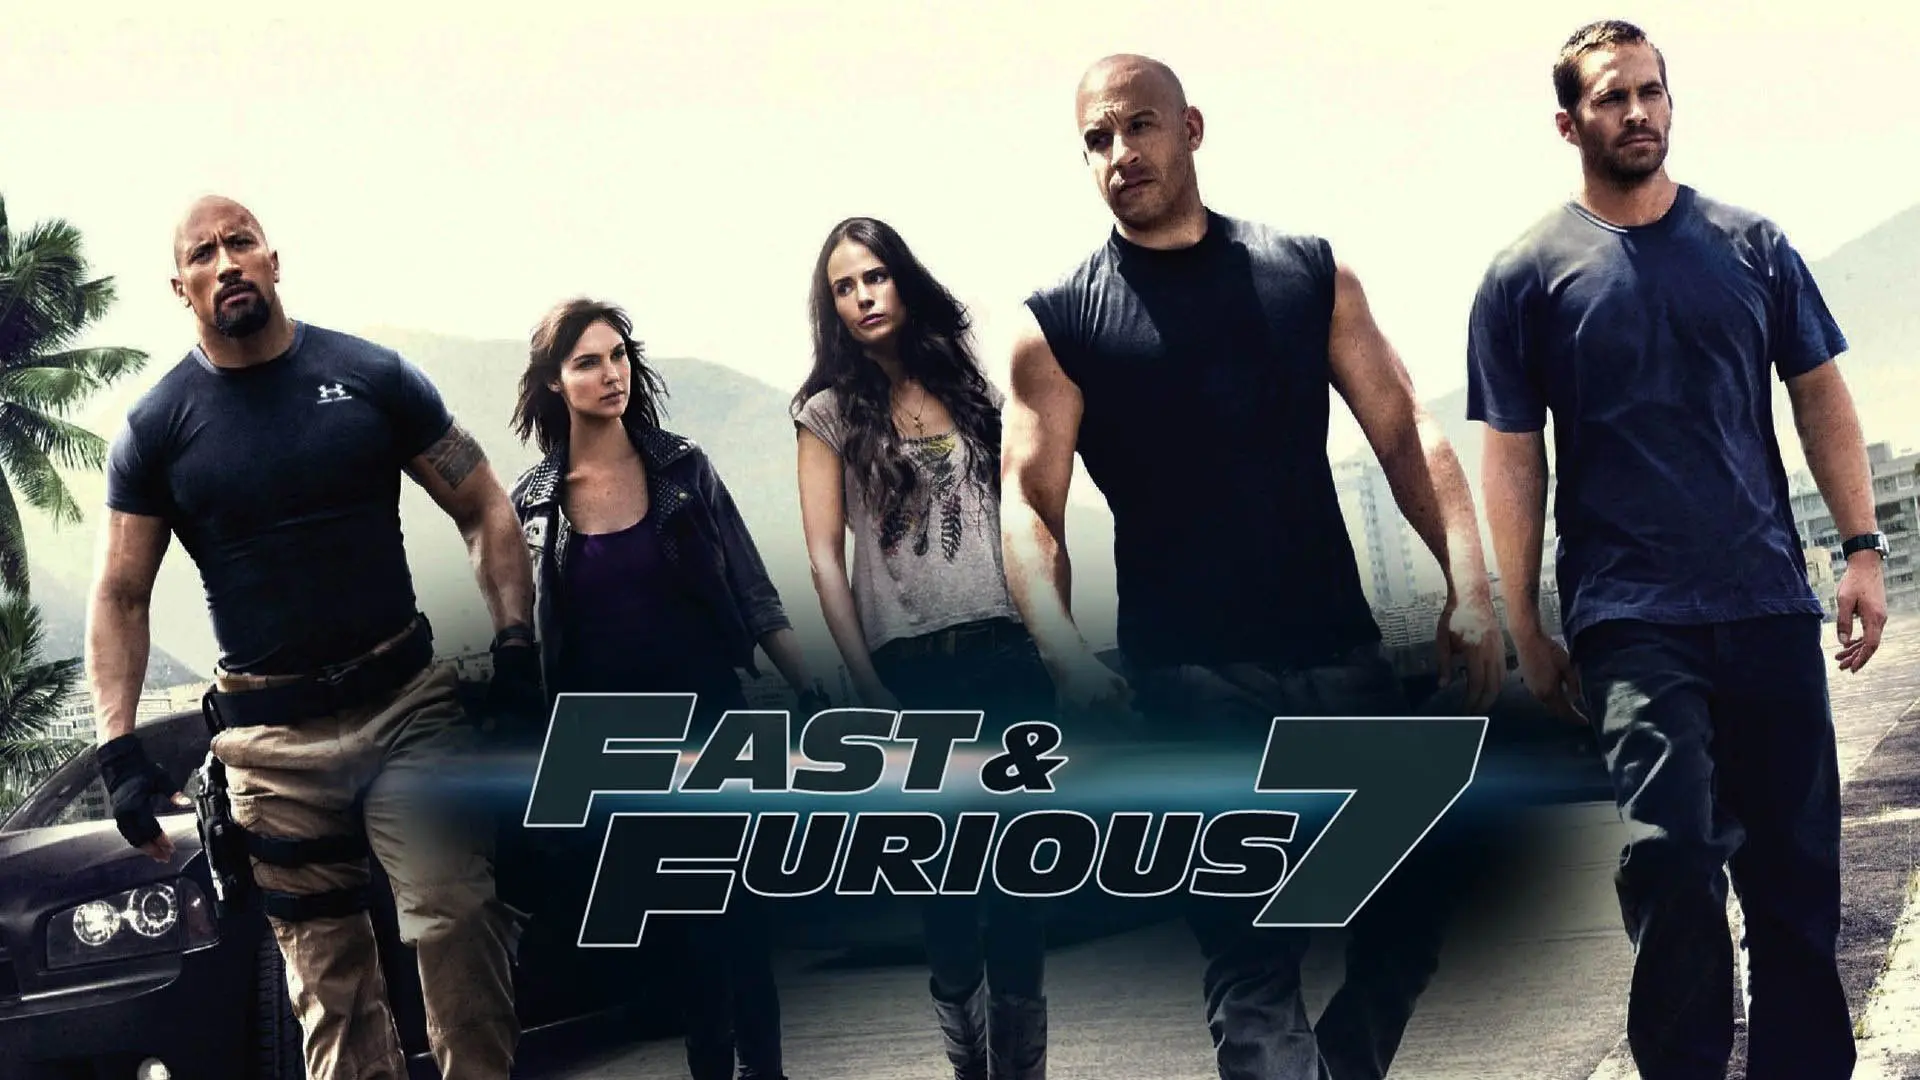 Movie Fast and Furious 7 wallpaper 6 | Background Image